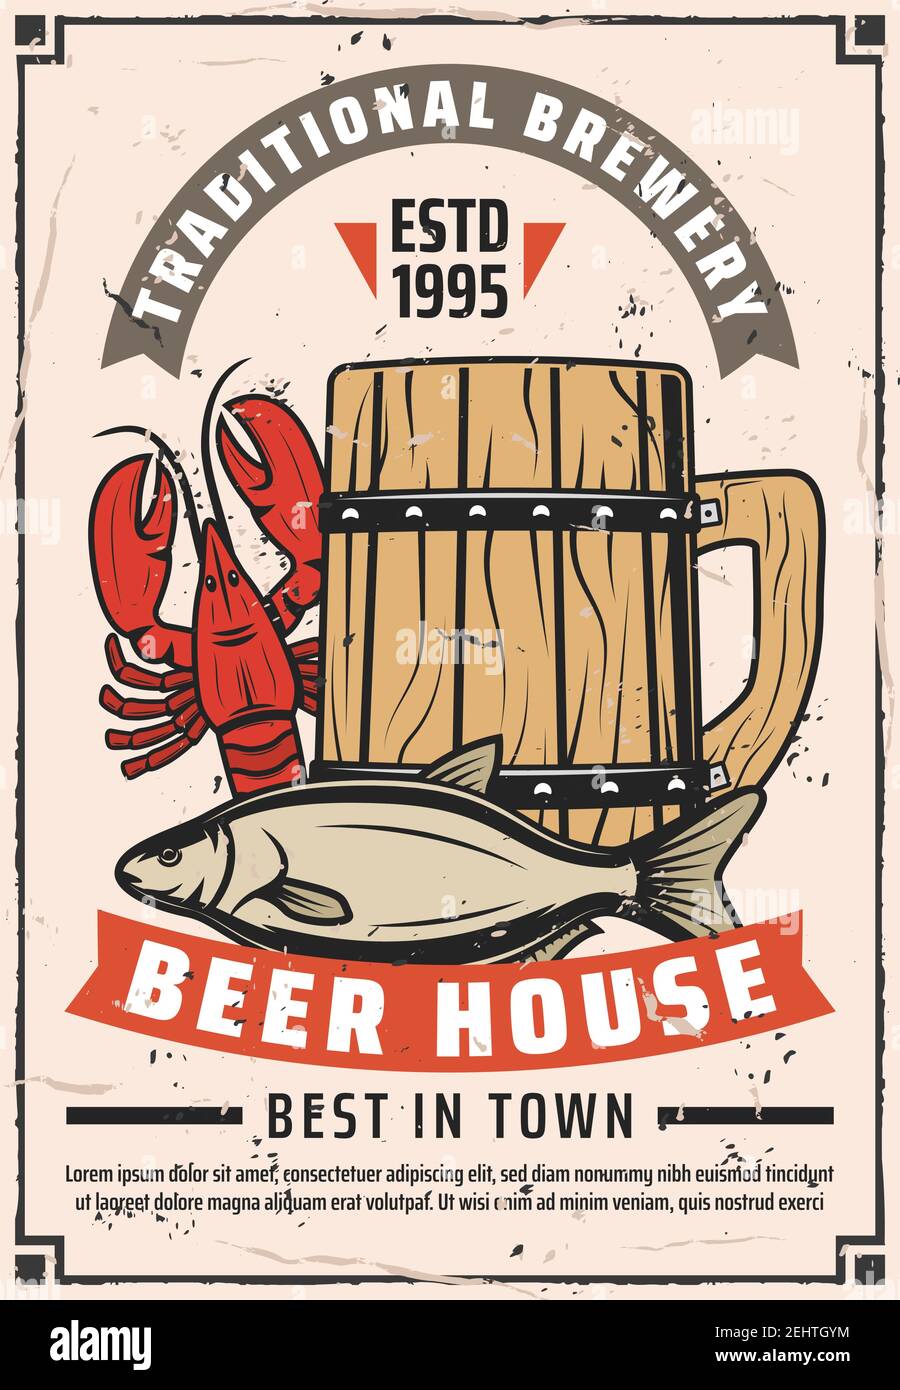 Beer house or brewery bar retro poster. Vector vintage advertisement design of craft draught beer in wooden mug with lobster crab or dry fish snacks, Stock Vector